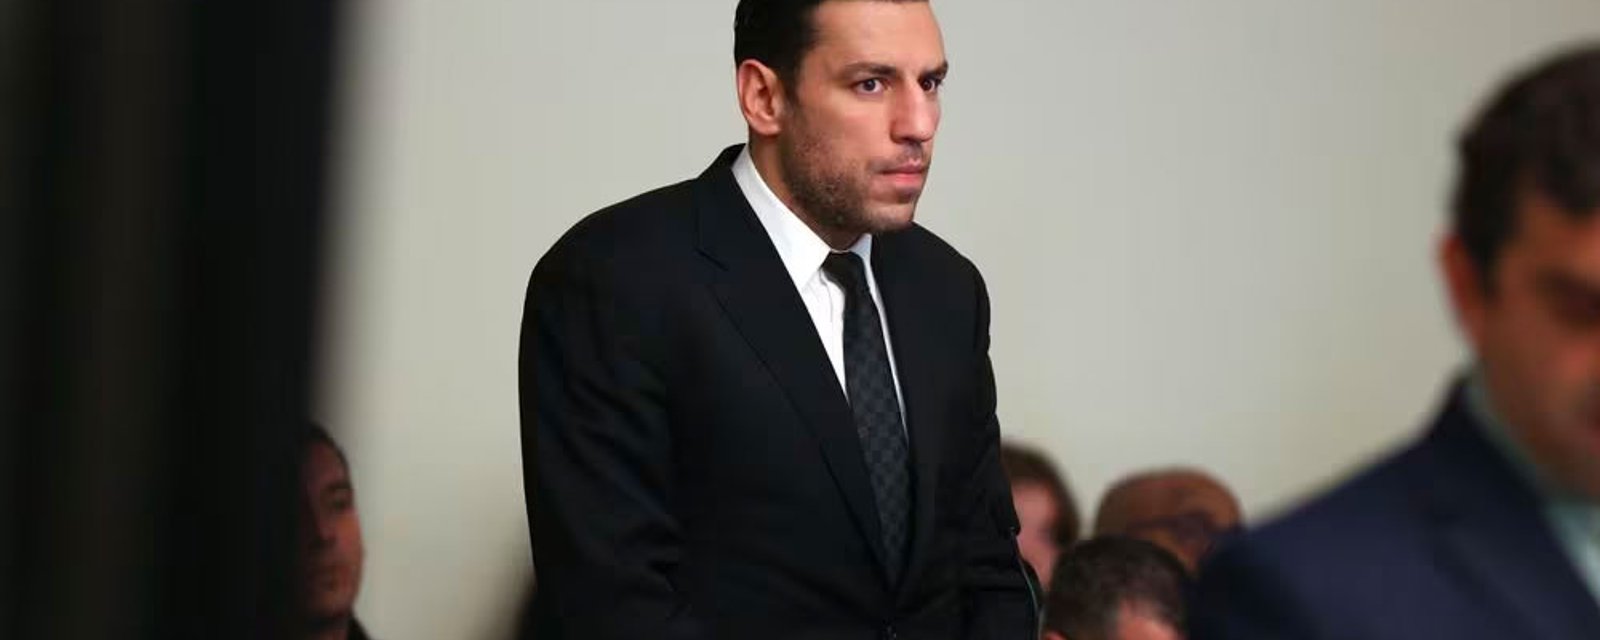 Lucic pleads 'Not Guilty' in Boston court today